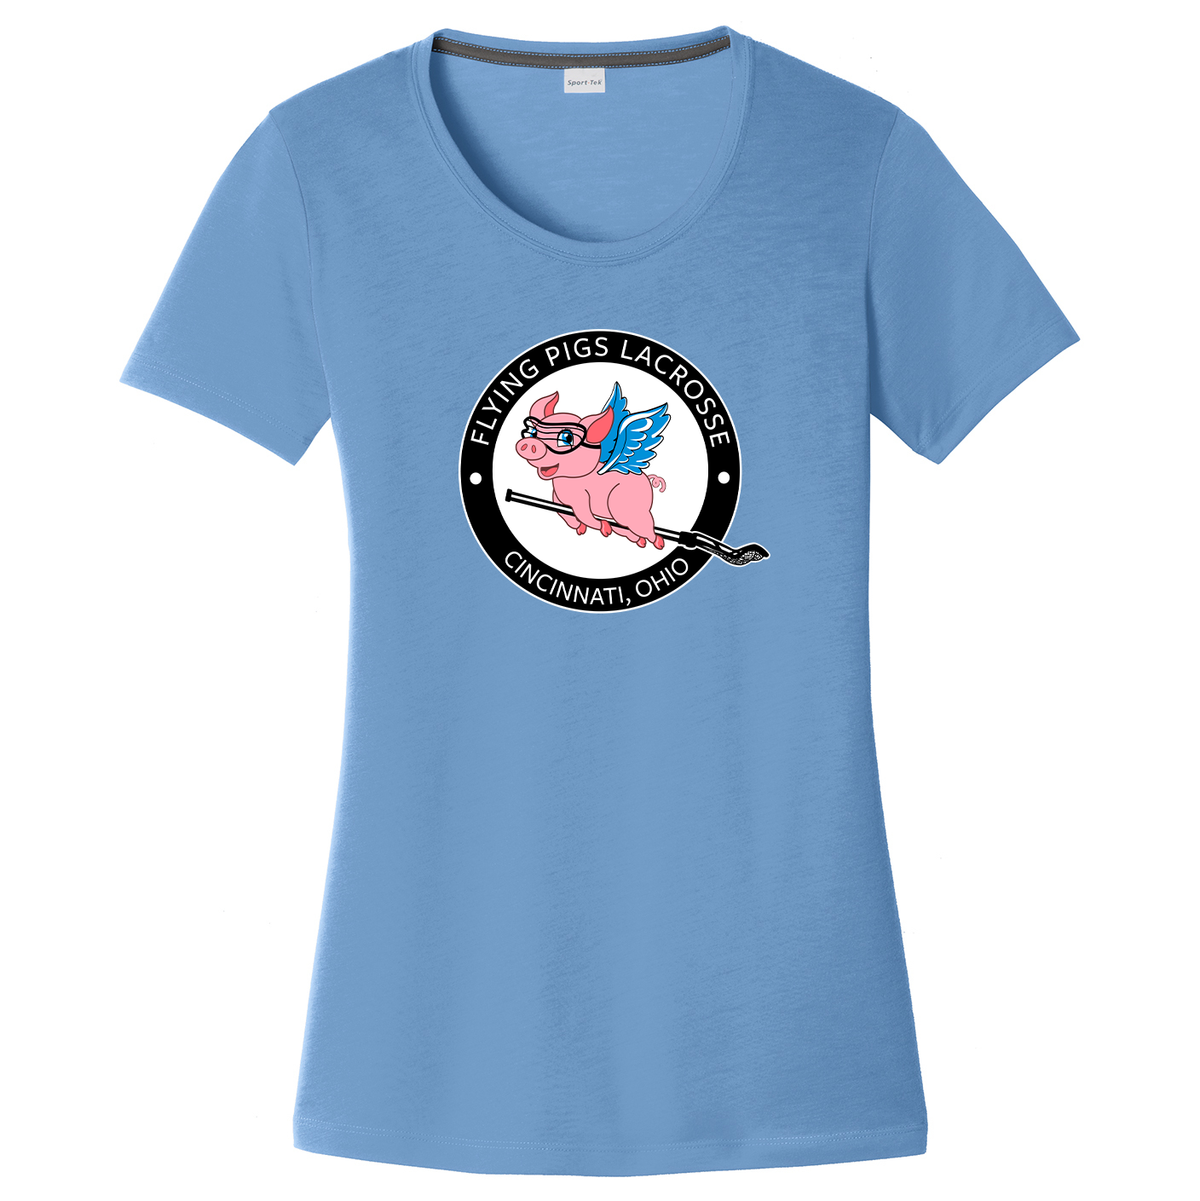 Flying Pigs Lacrosse Women's CottonTouch Performance T-Shirt